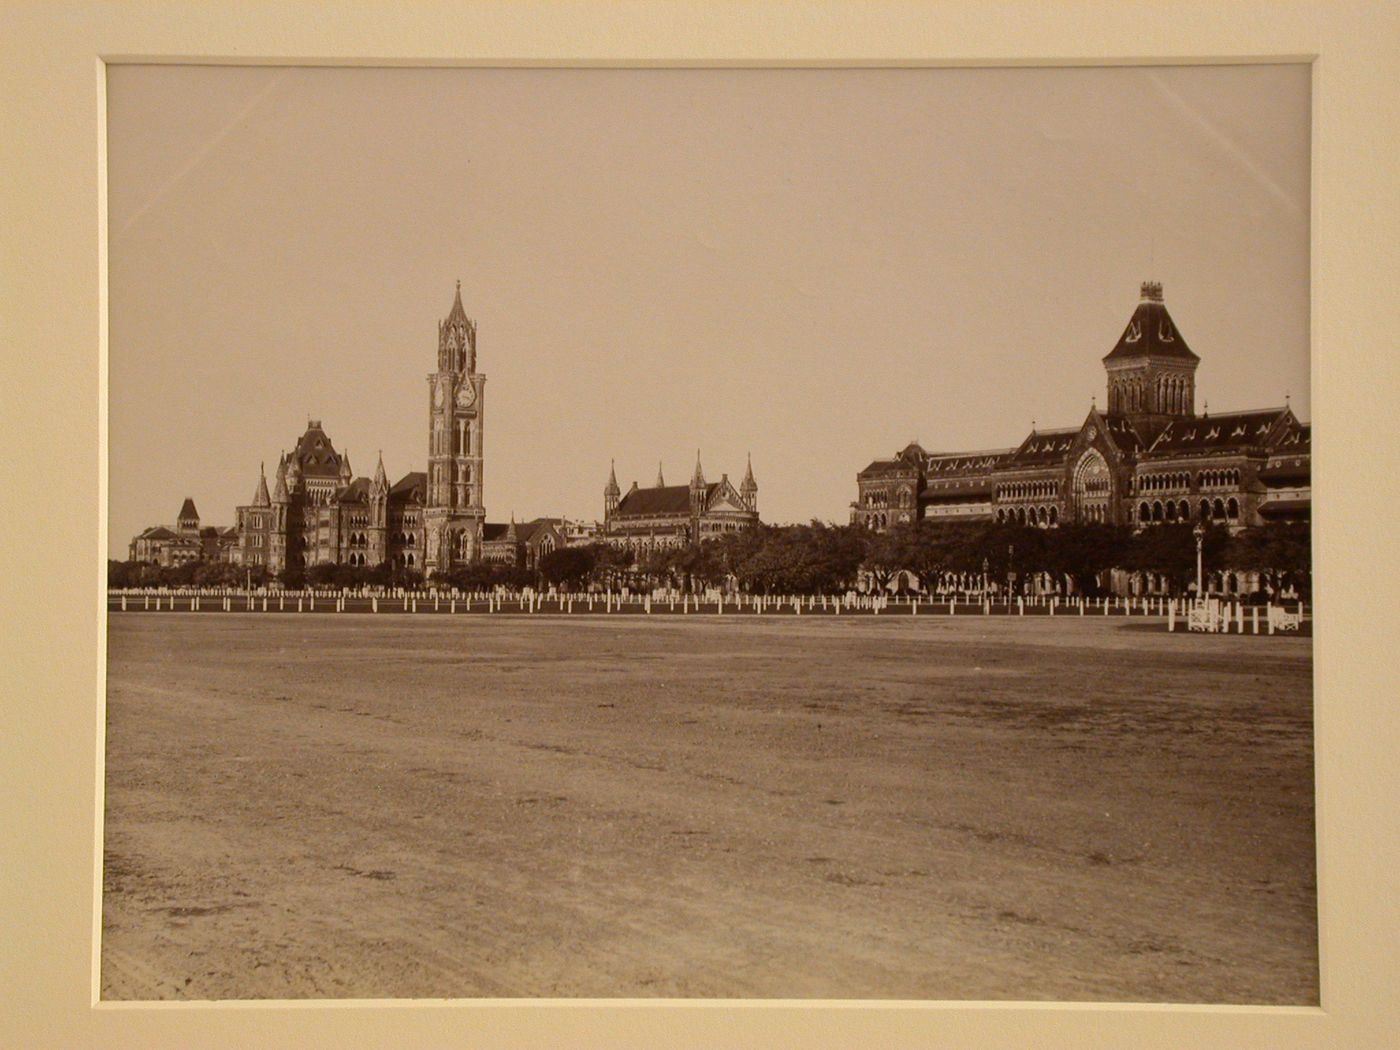 View of Queens Road (now Maharashi Karve Marg) with the Public Works Department Offices, High Court, Library, Rajabai Tower and Convocation Hall of Bombay University (now Mumbai University) and the Secretariat in the background, Bombay (now Mumbai), India